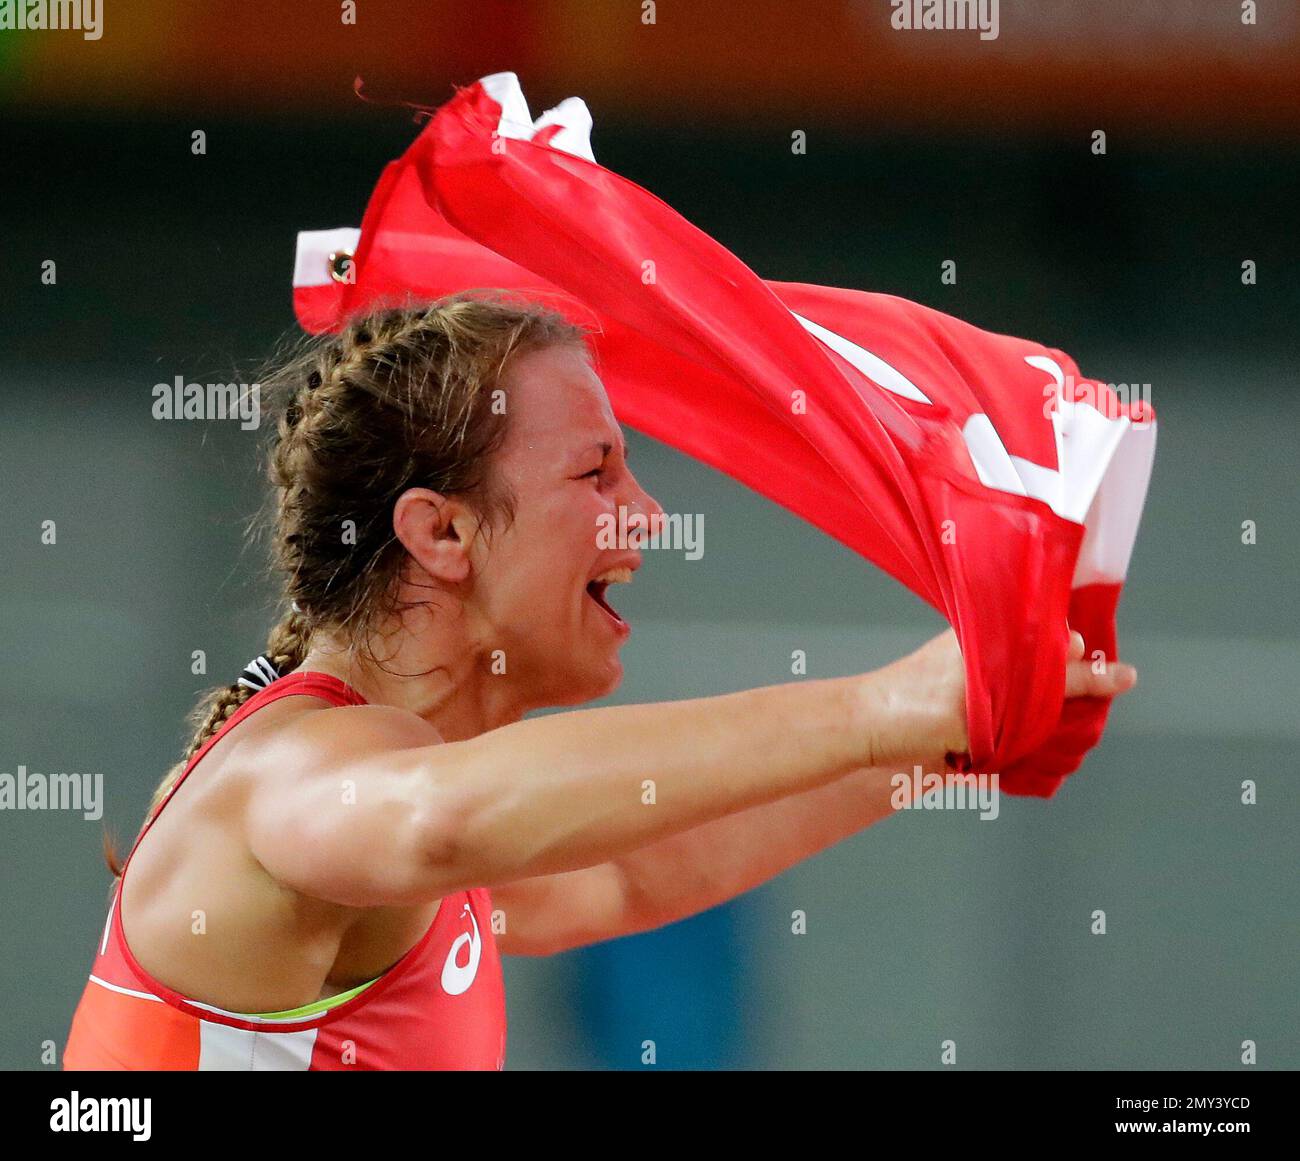 Canada's Erica Elizabeth Wiebe celebrates after beating Kazakhstan's Guzel  Manyurova for the gold in the women's wrestling freestyle 75-kg competition  at the 2016 Summer Olympics in Rio de Janeiro, Brazil, Thursday, Aug.